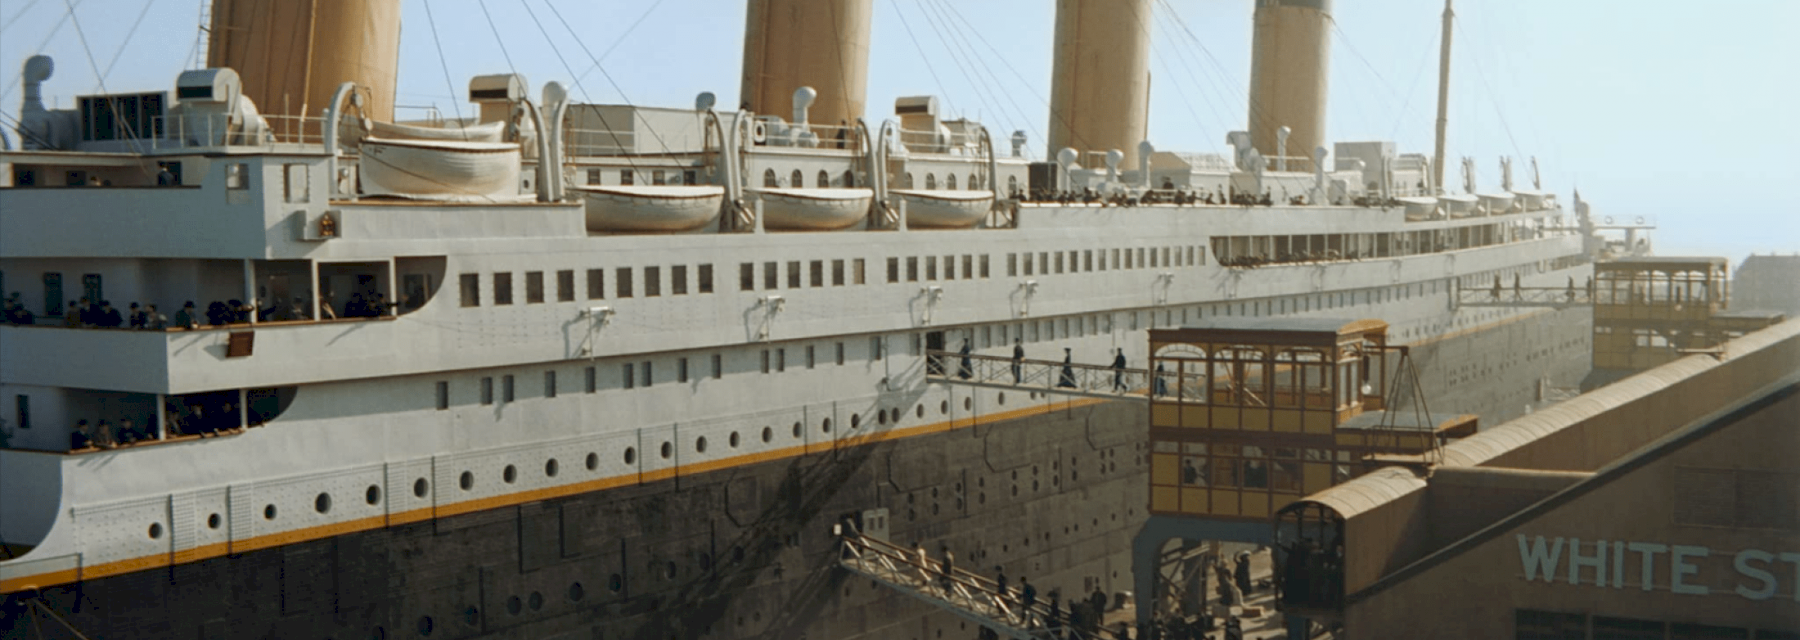 10 famous people who died on the Titanic and their poignant stories